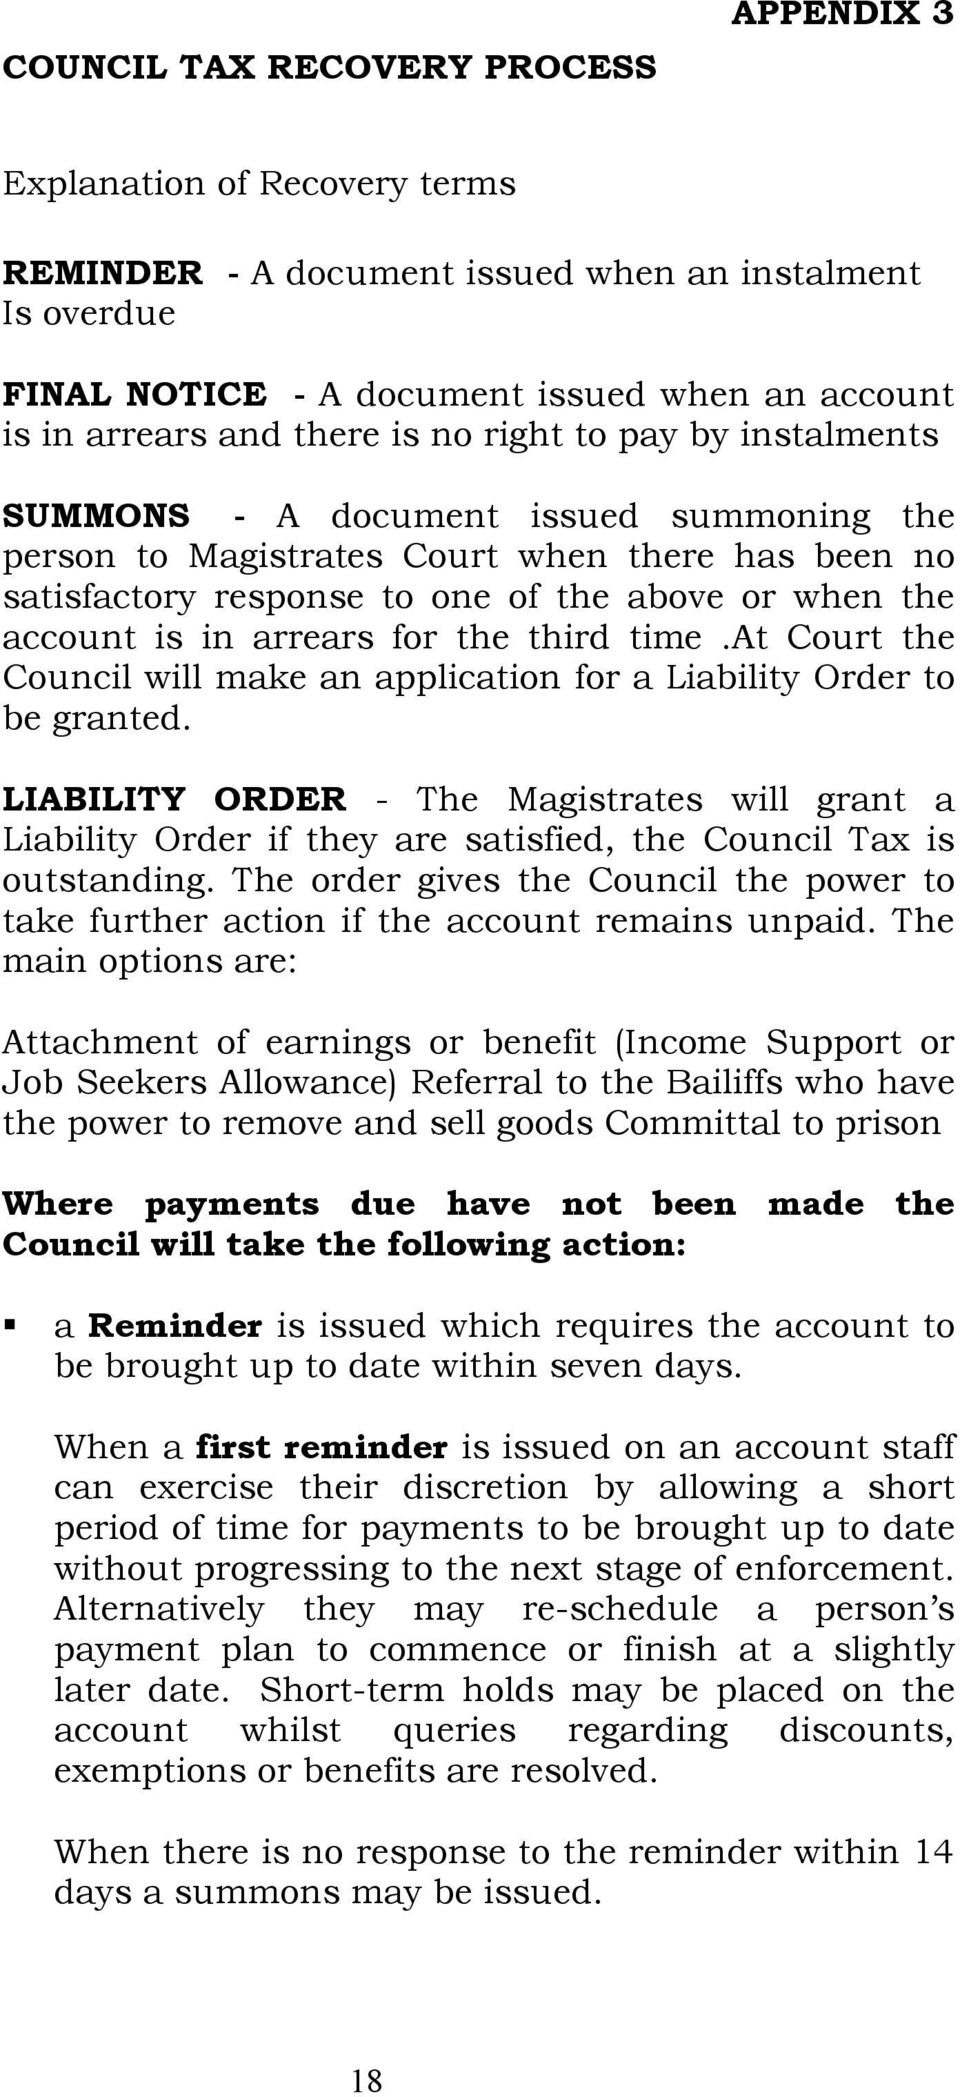 in arrears for the third time.at Court the Council will make an application for a Liability Order to be granted.